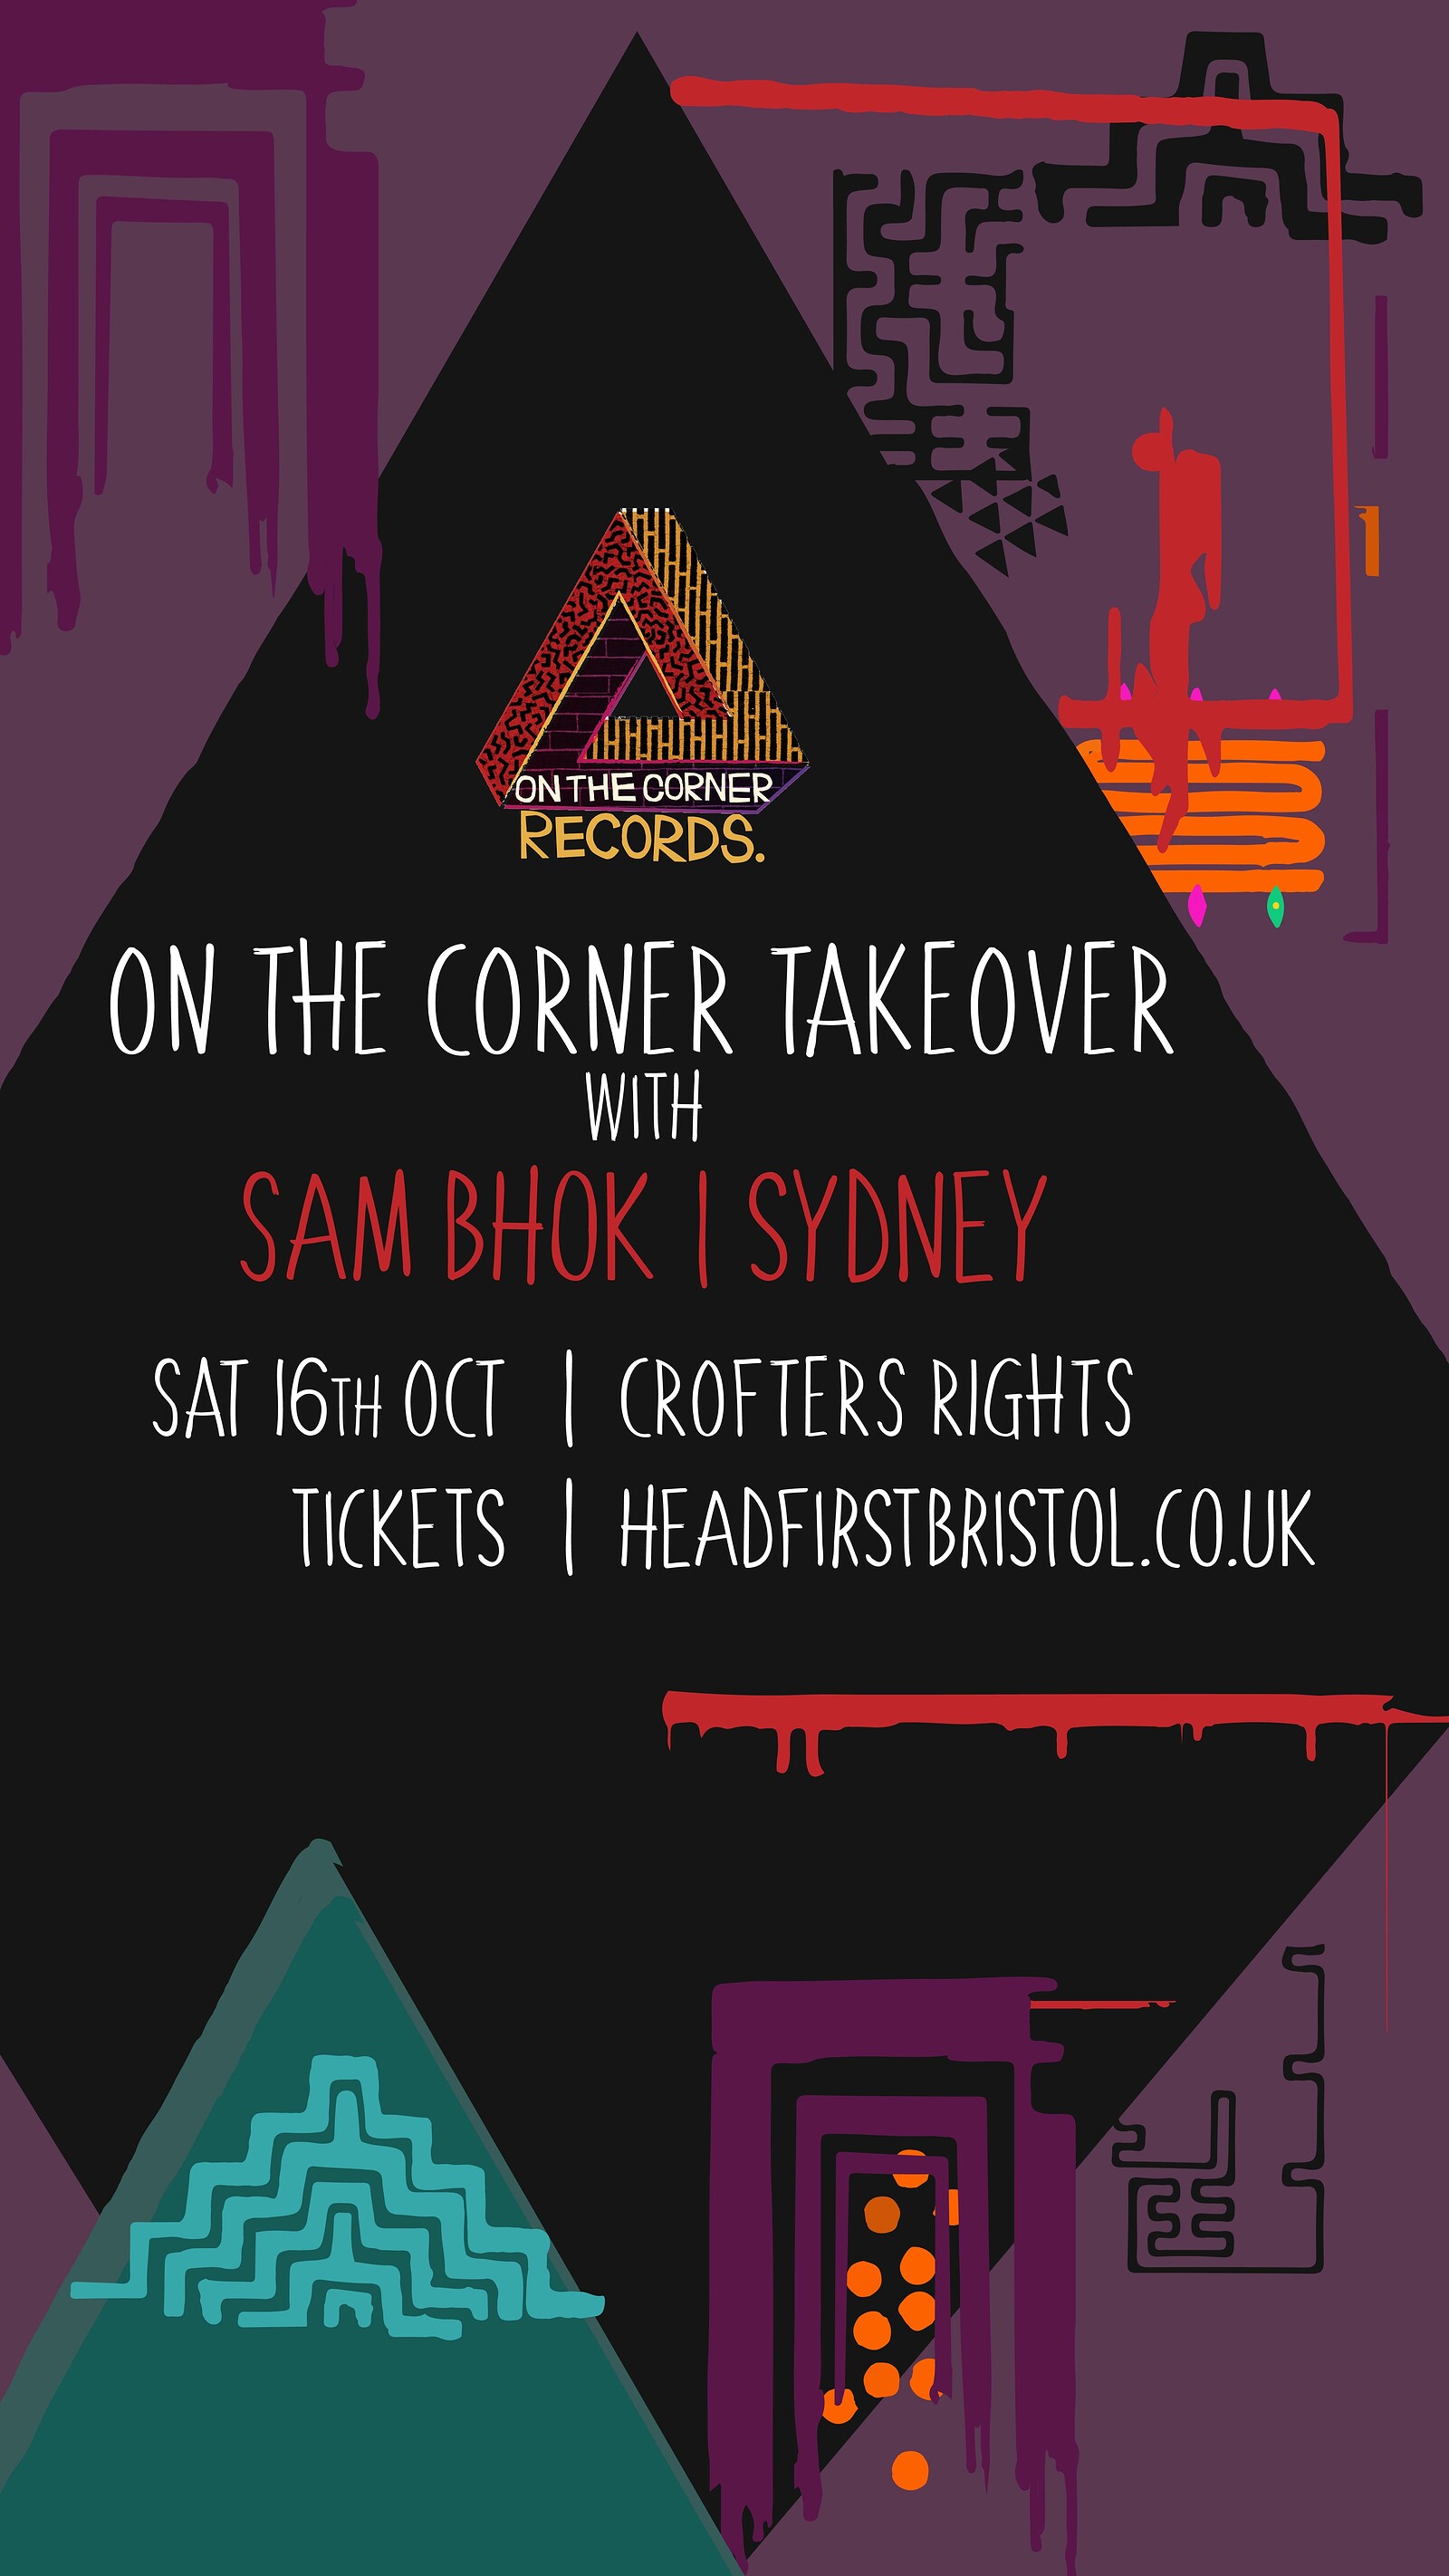 On The Corner Takeover: Sam Bhok & Sydney at Crofters Rights